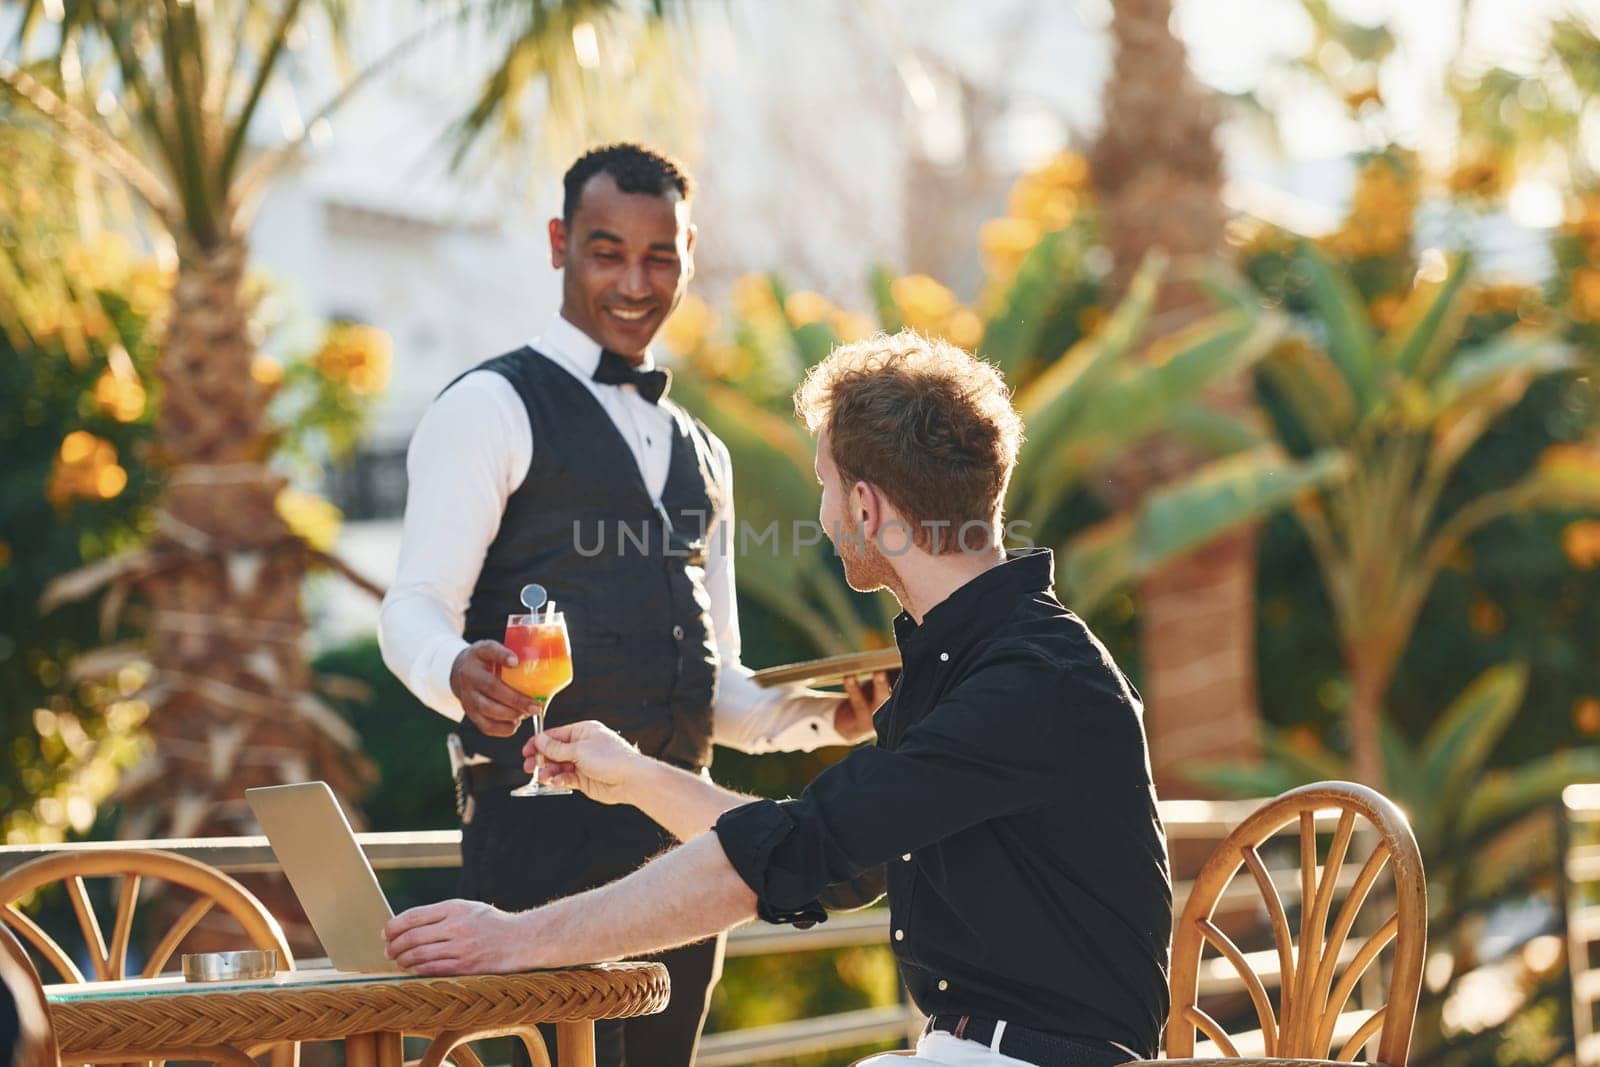 Serviced by waiter. Young man is outdoors at sunny daytime. Concept of vacation by Standret